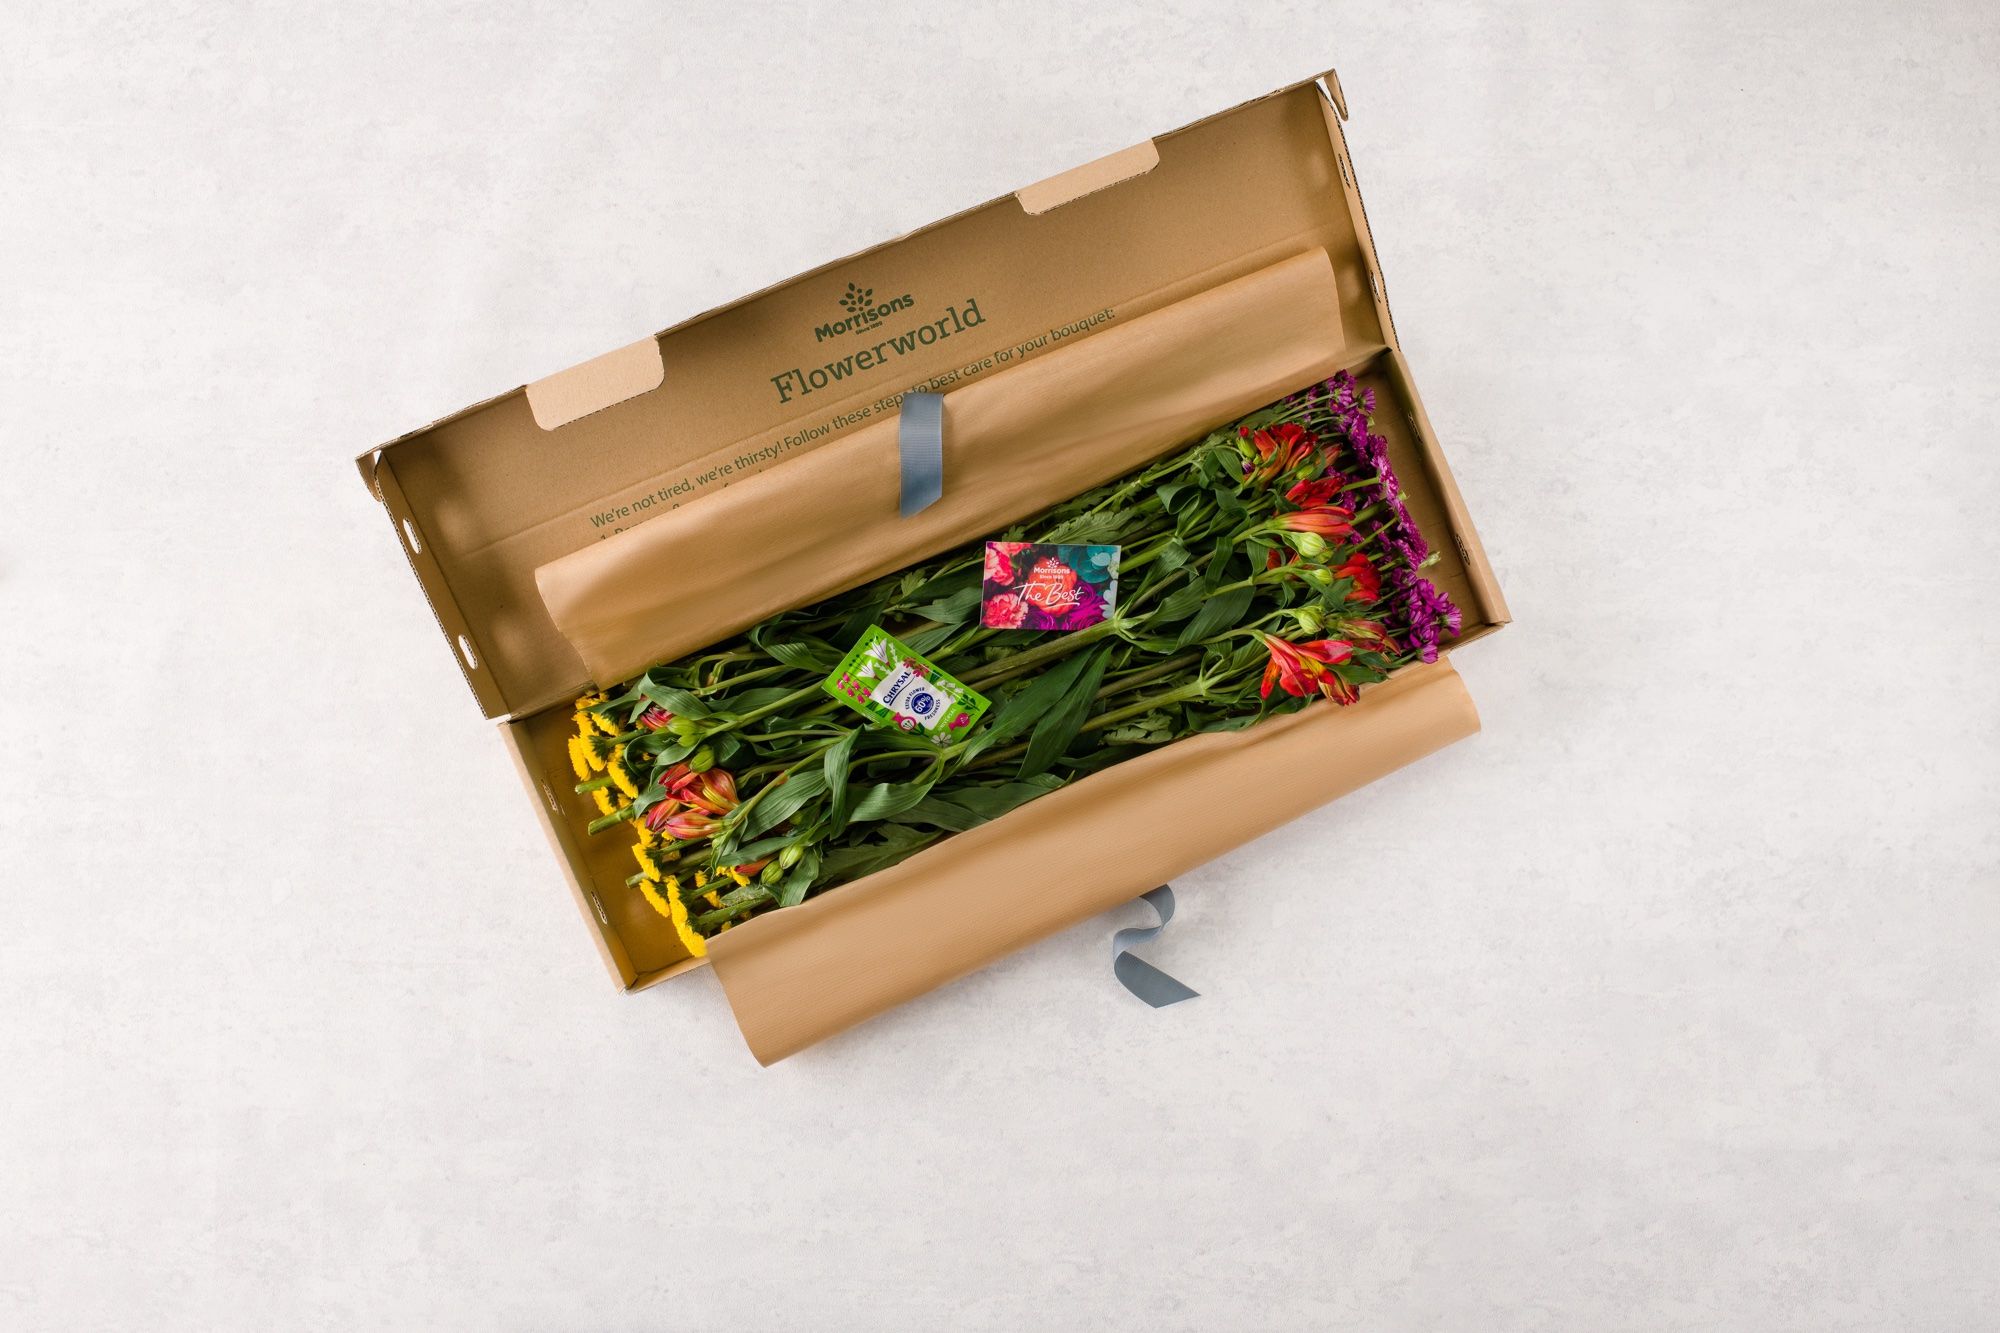 Morrisons launches affordable letterbox flower delivery service